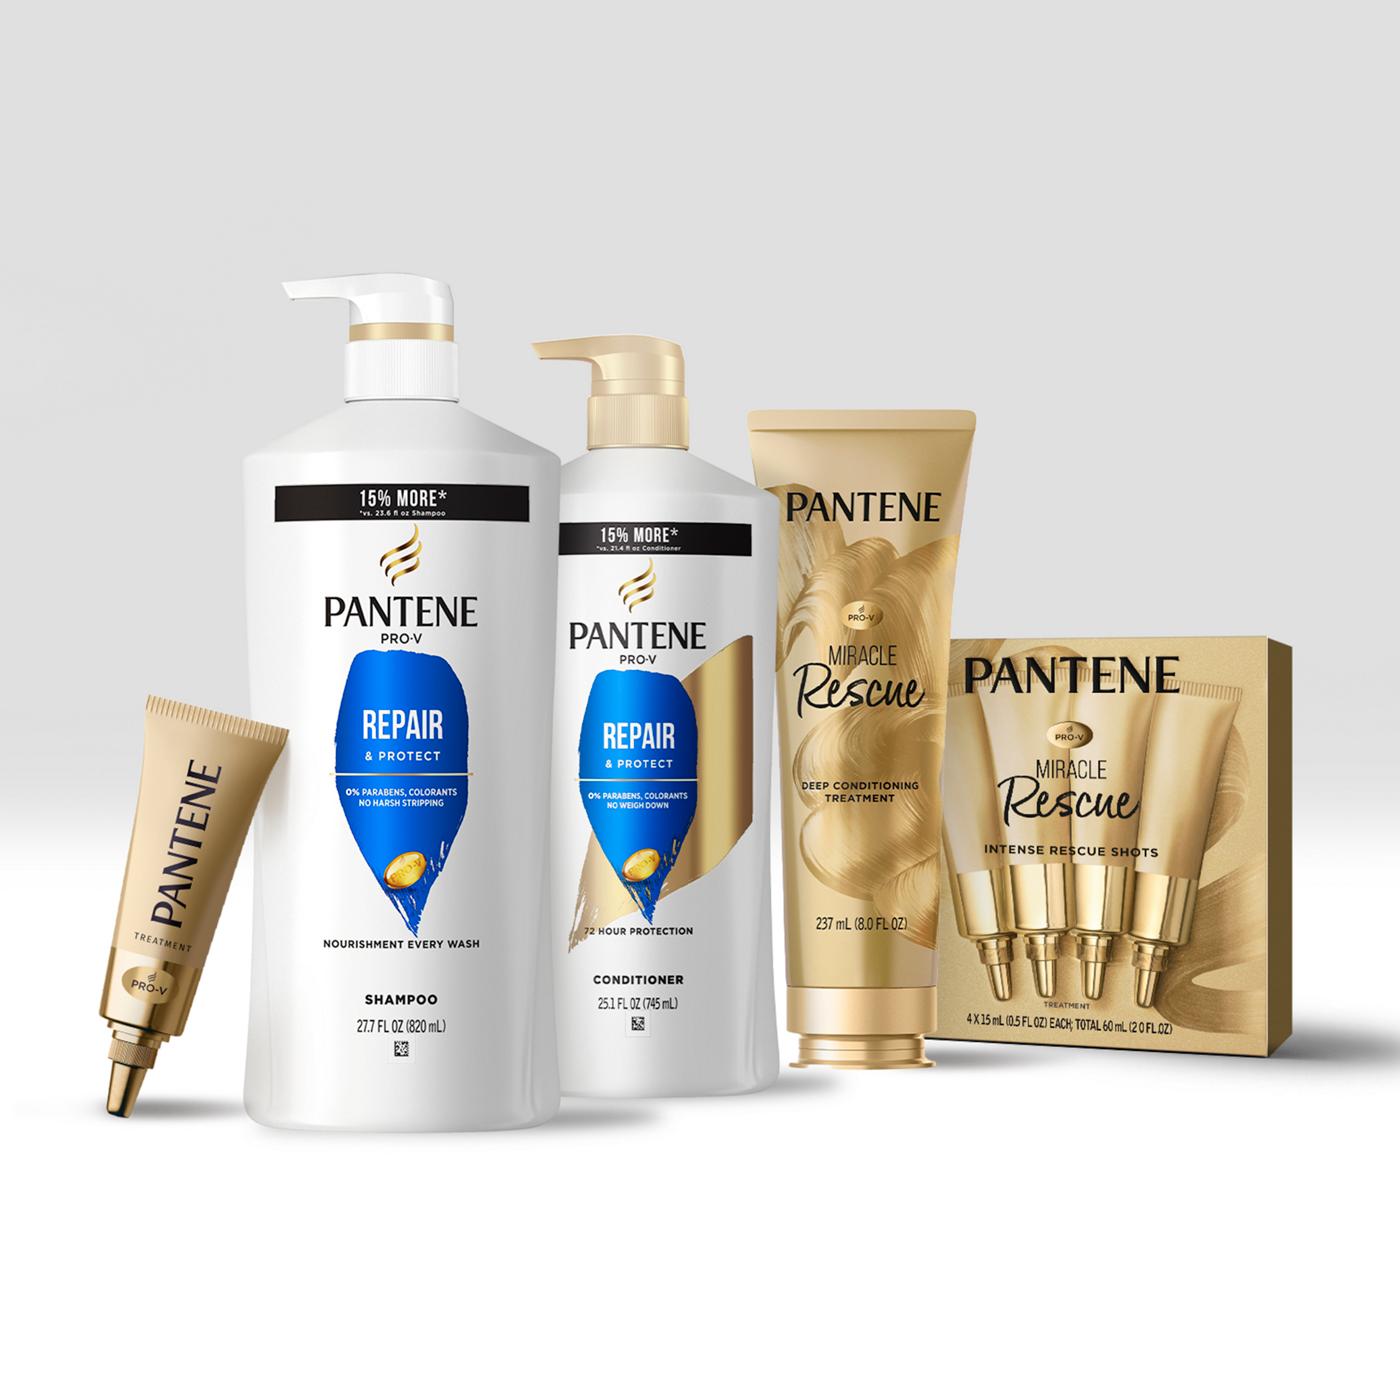 Pantene PRO-V Repair & Protect Conditioner; image 5 of 9